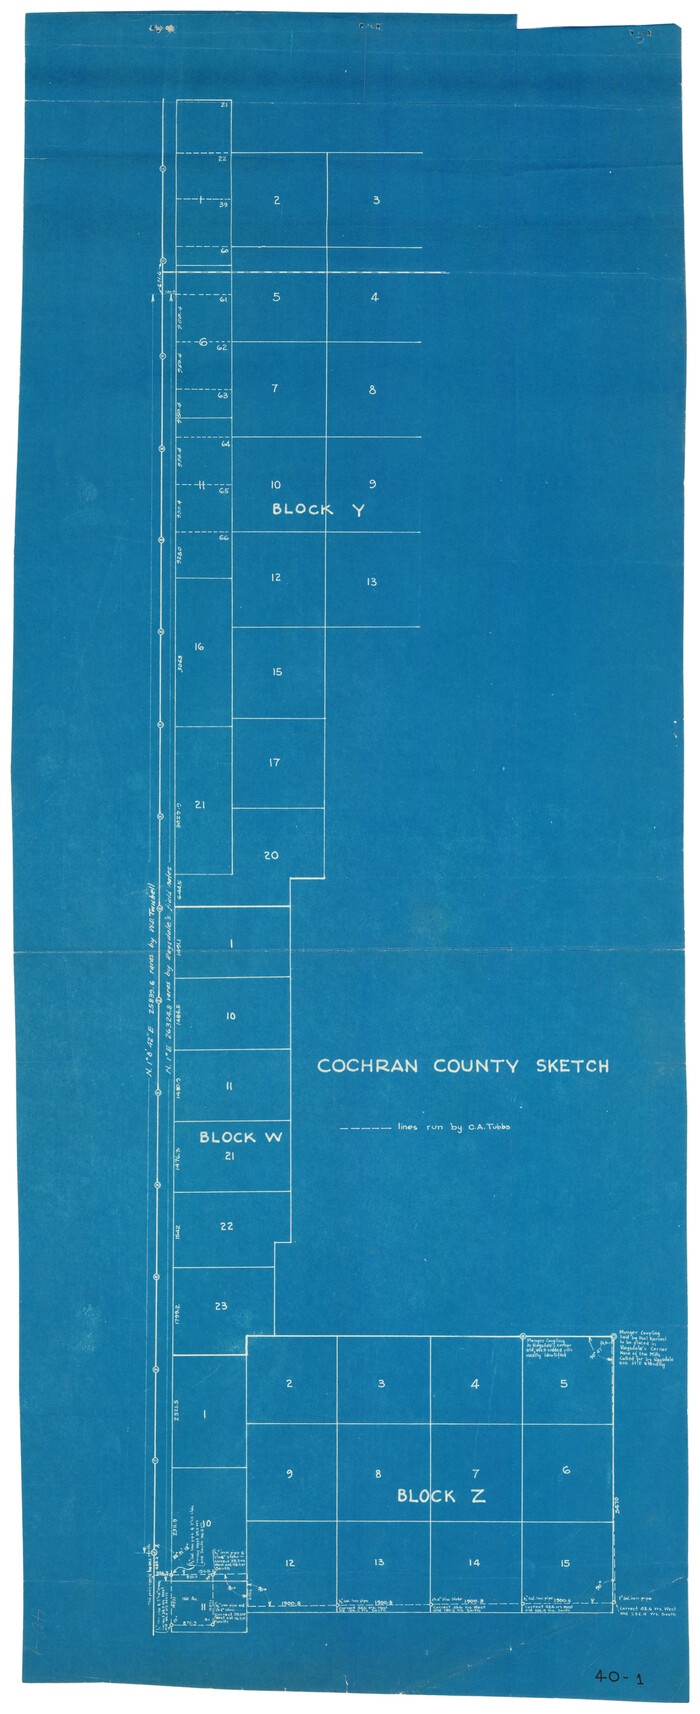 90435, Cochran County Sketch [showing lines run by C. A. Tubbs], Twichell Survey Records